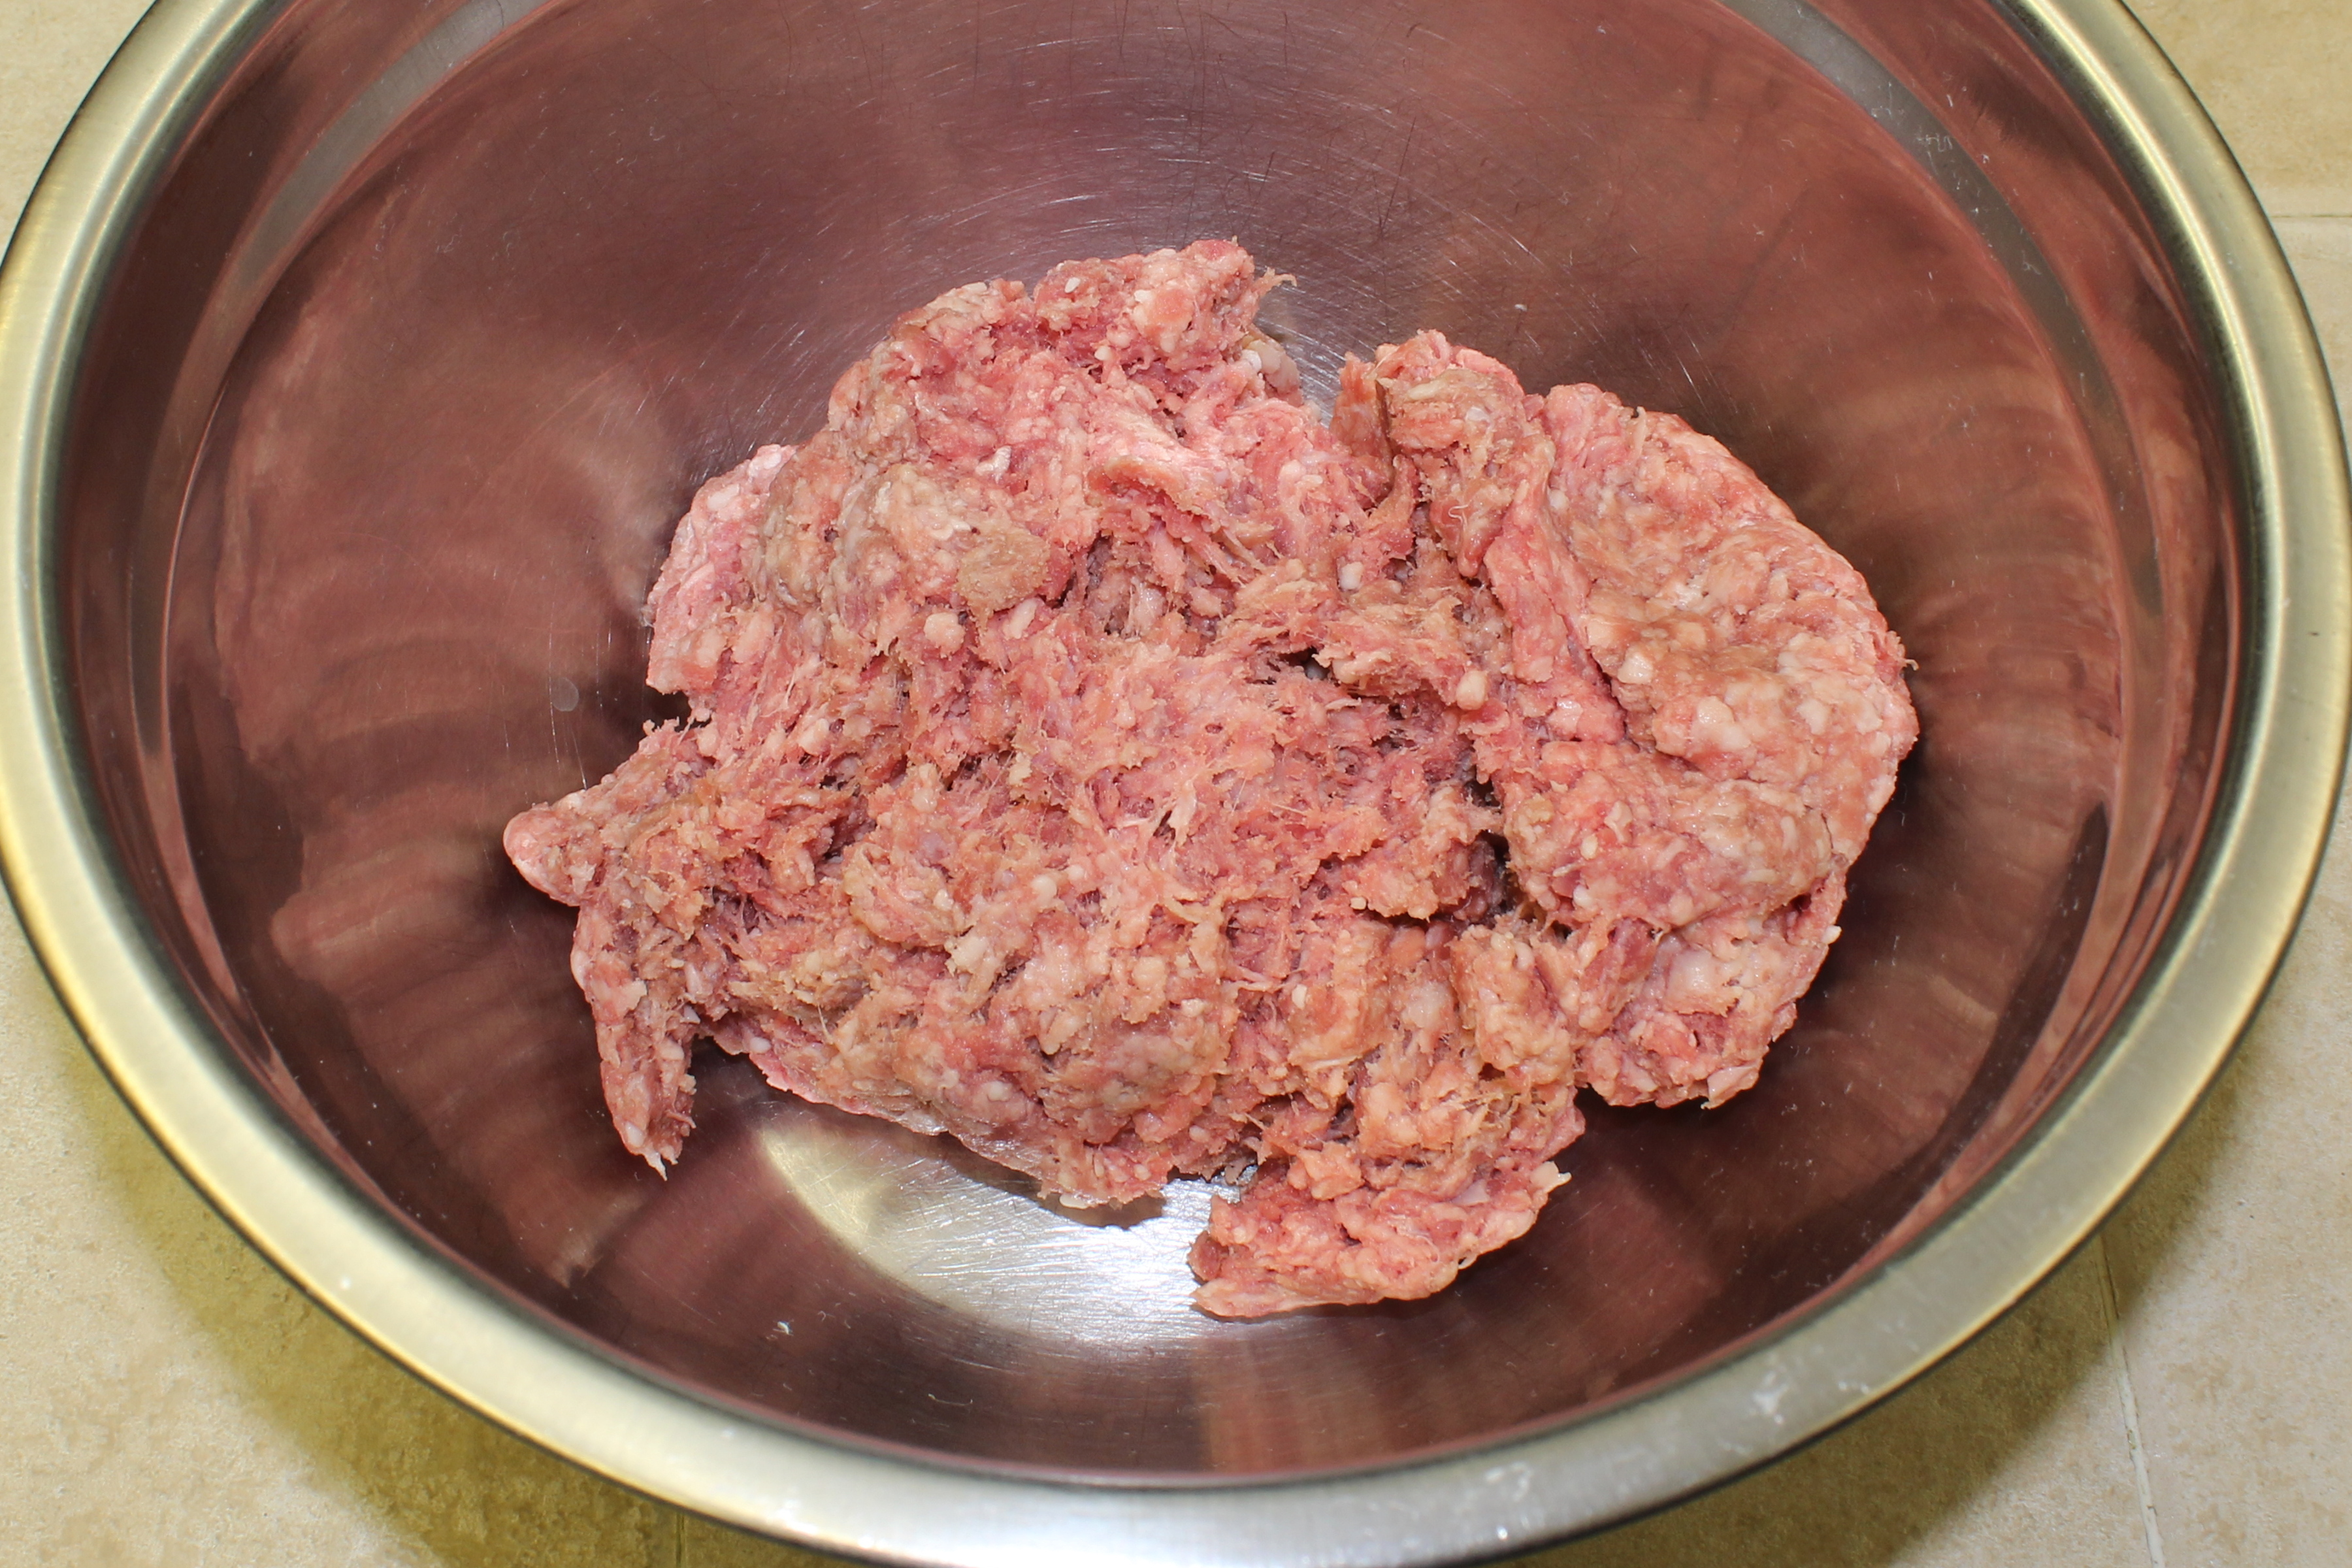 sausage and ground beef in a bowl